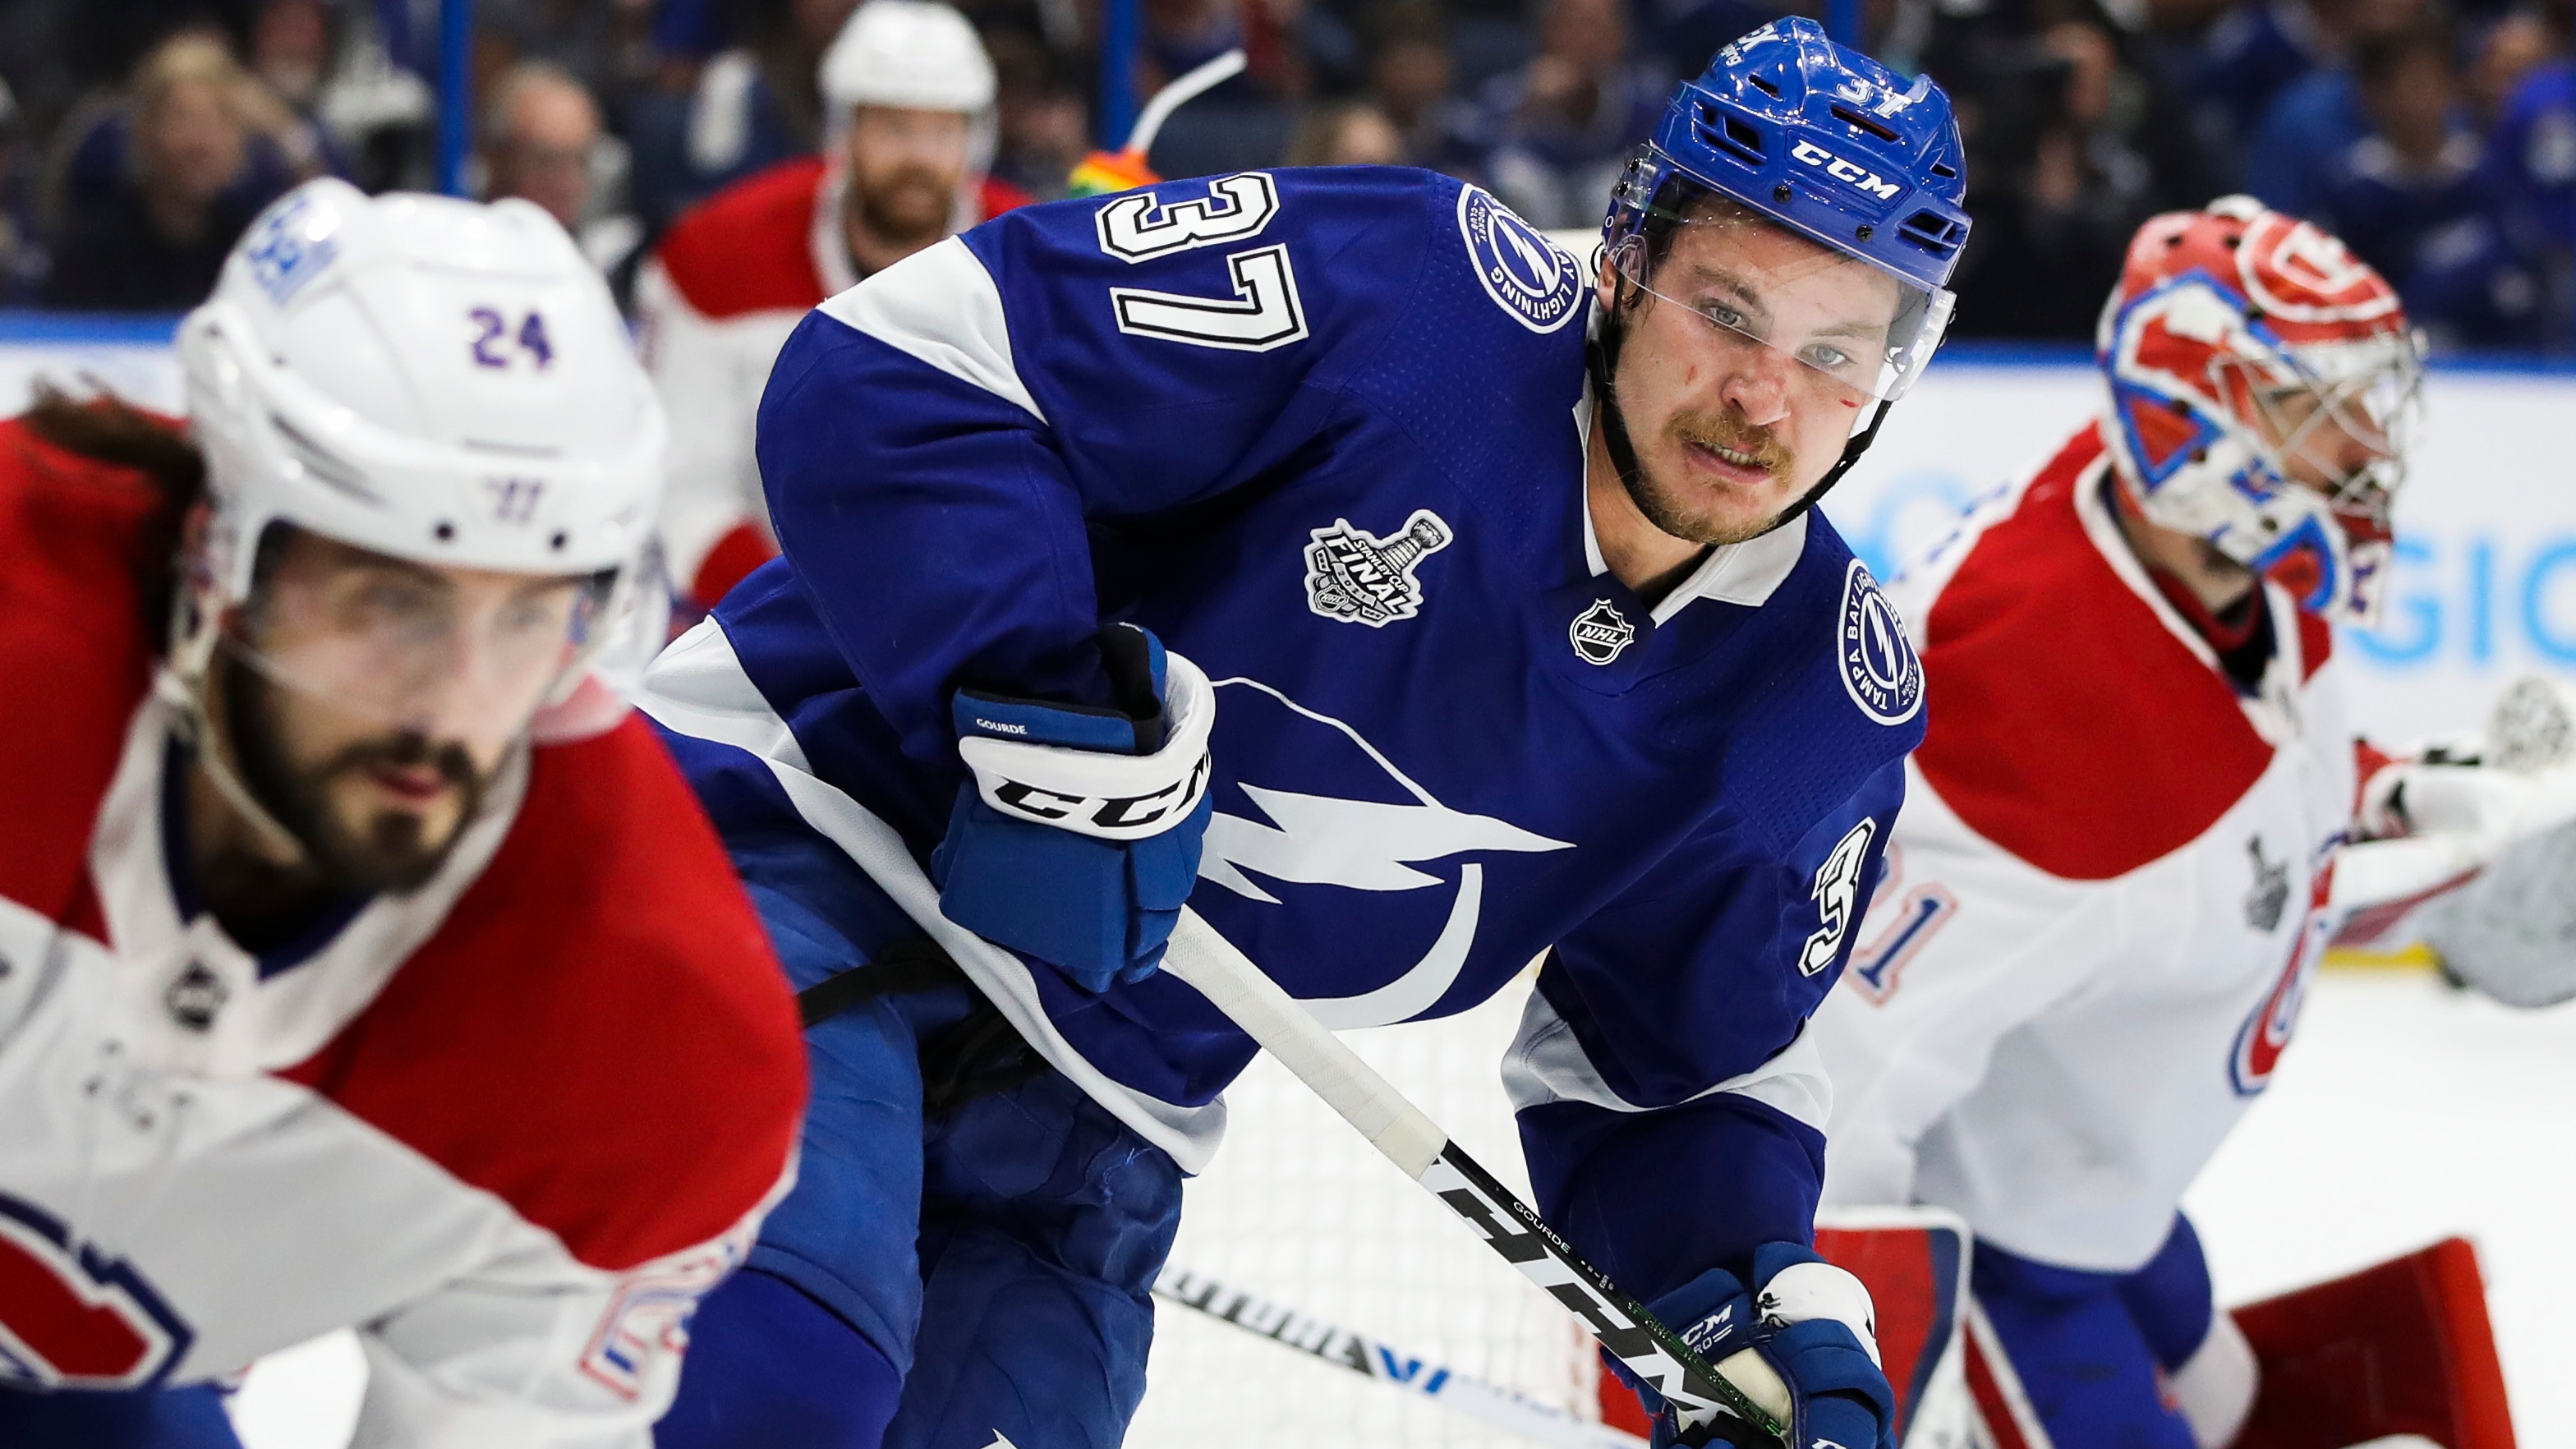 LA Kings: Three players to target after Lightning re-signed Sergachev